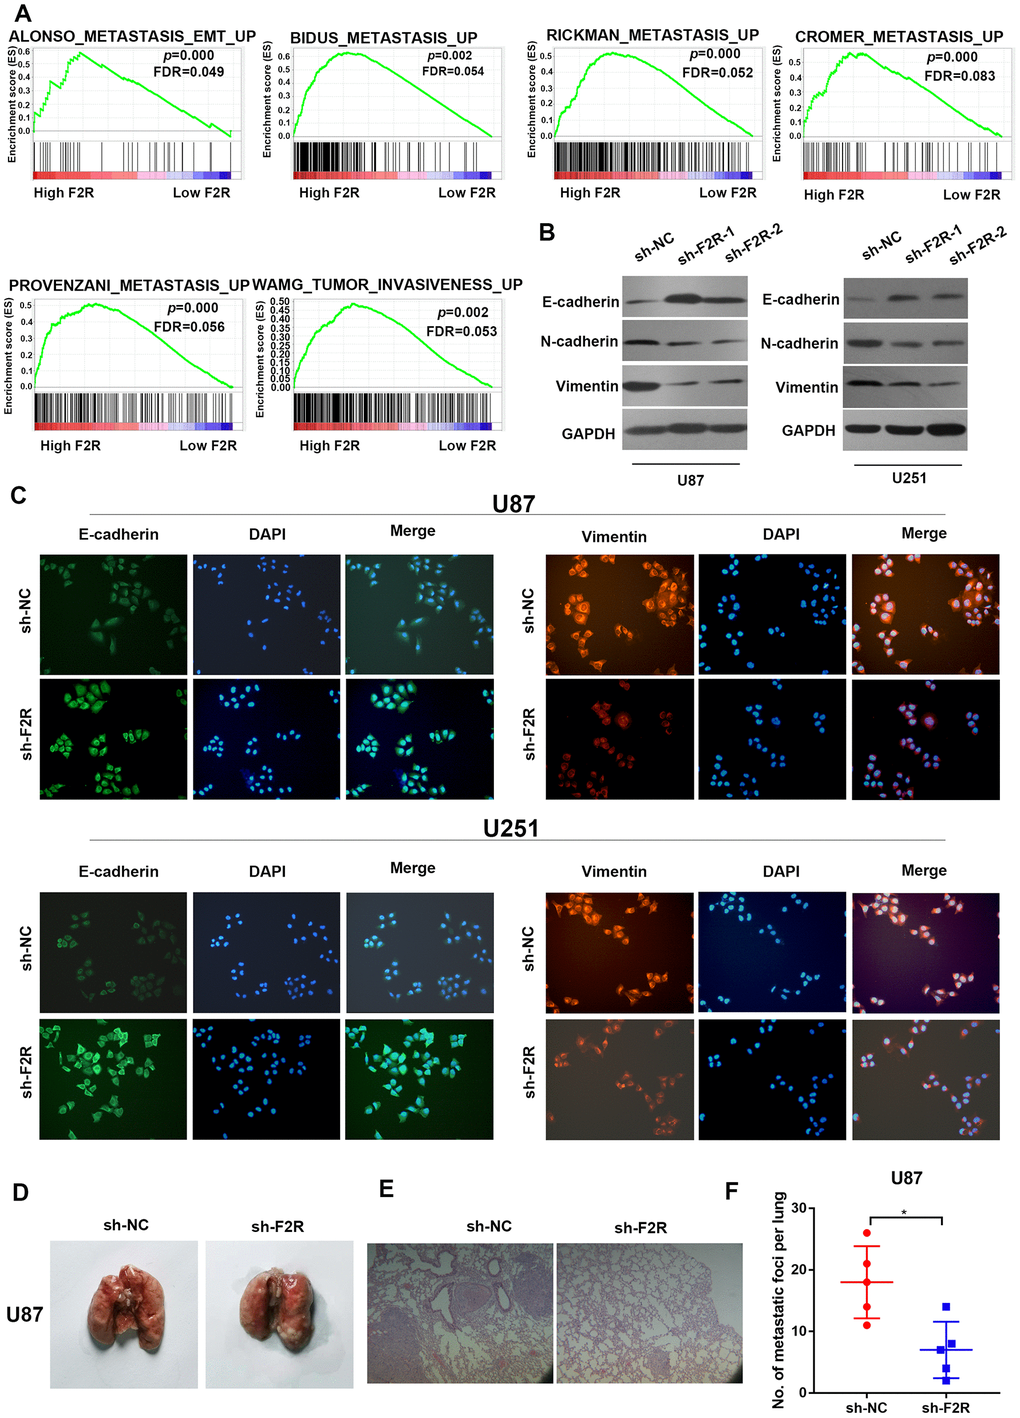 F2R promotes glioma cell epithelial-mesenchymal transition (EMT) in vitro. (A) GSEA enrichment plots showed that enrichment of metastasis-related pathways was associated with up-regulation of F2R. (B) Western blot analysis revealed that knocking down F2R inhibited the epithelial-mesenchymal transition process. (C) Immunofluorescence staining of E-cadherin and Vimentin in U87 and U251 cells with F2R knockdown. (D) Representative images of metastatic lung in each group. (E) Representative HE images of metastatic lung in each group. Scale bar, 100 mm. (F) lung metastasis areas in each group. All experiments were repeated at least three times. Data are presented as the mean ± SEM. *P